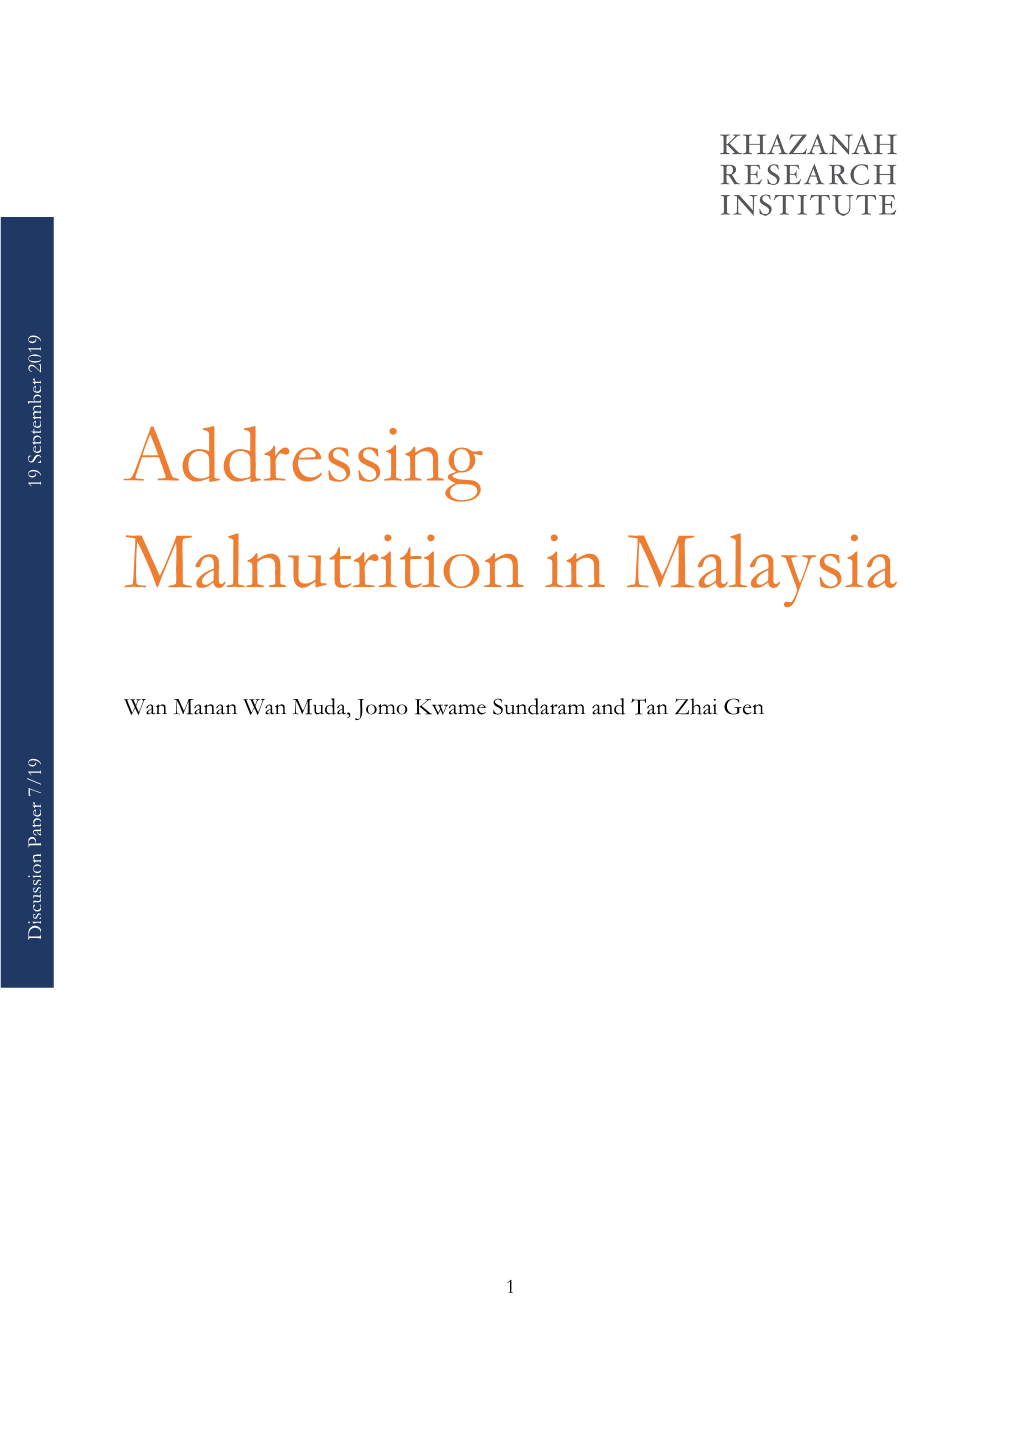 Discussion Paper Addressing Malnutrition in Malaysia